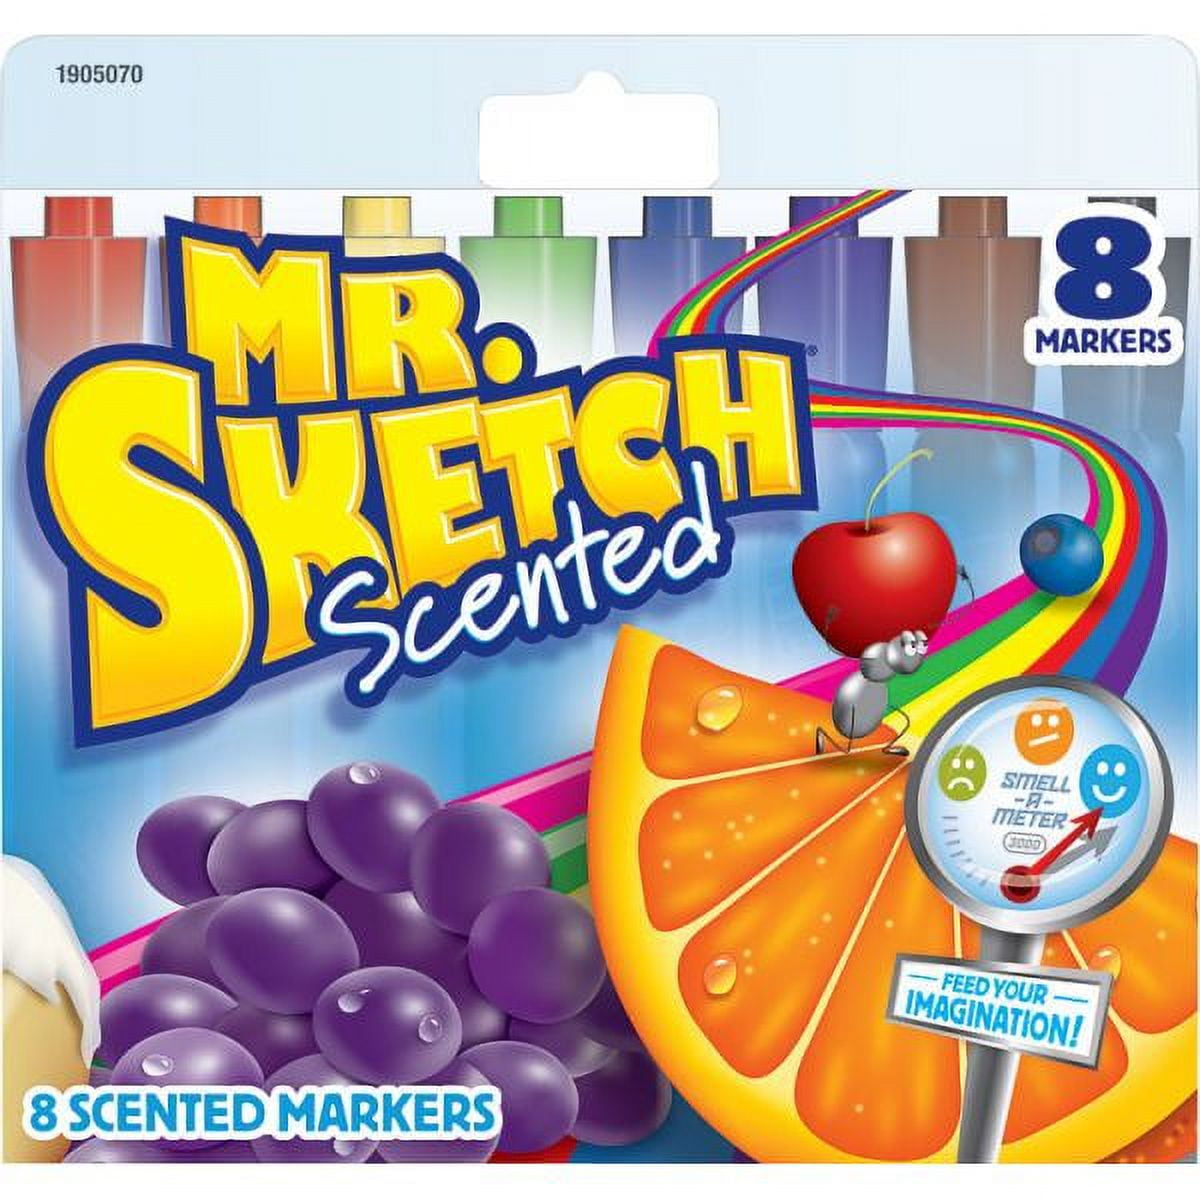 Mr. Sketch Scented Watercolor Marker Broad Chisel Tip Assorted Colors 22/Pack